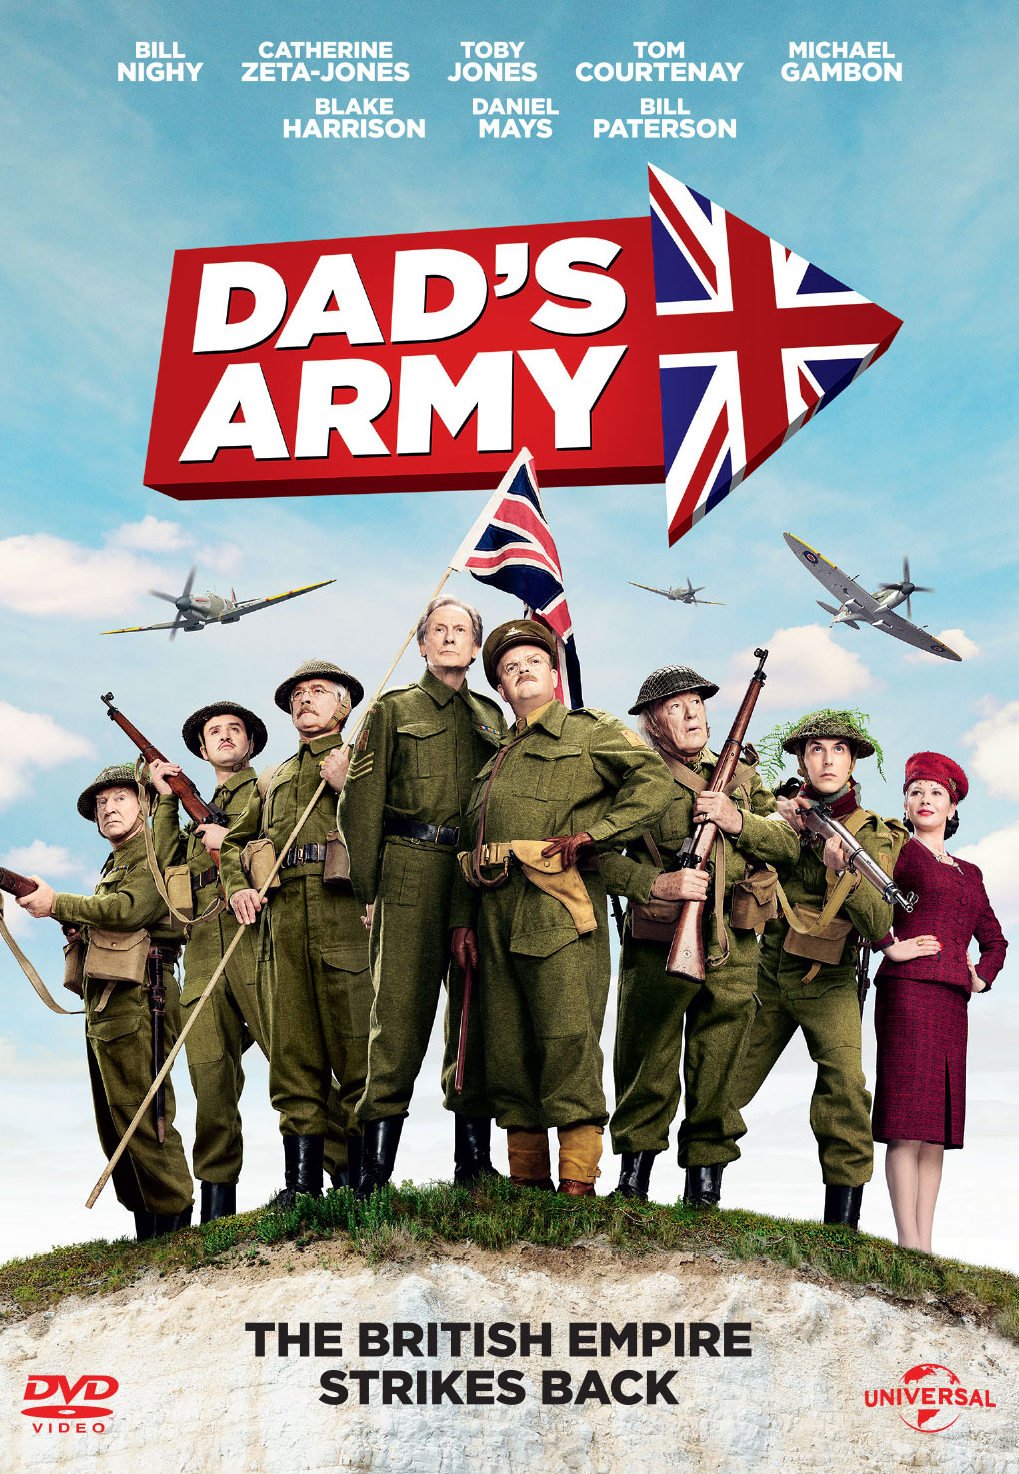 dads-army-movie-purchase-or-watch-online